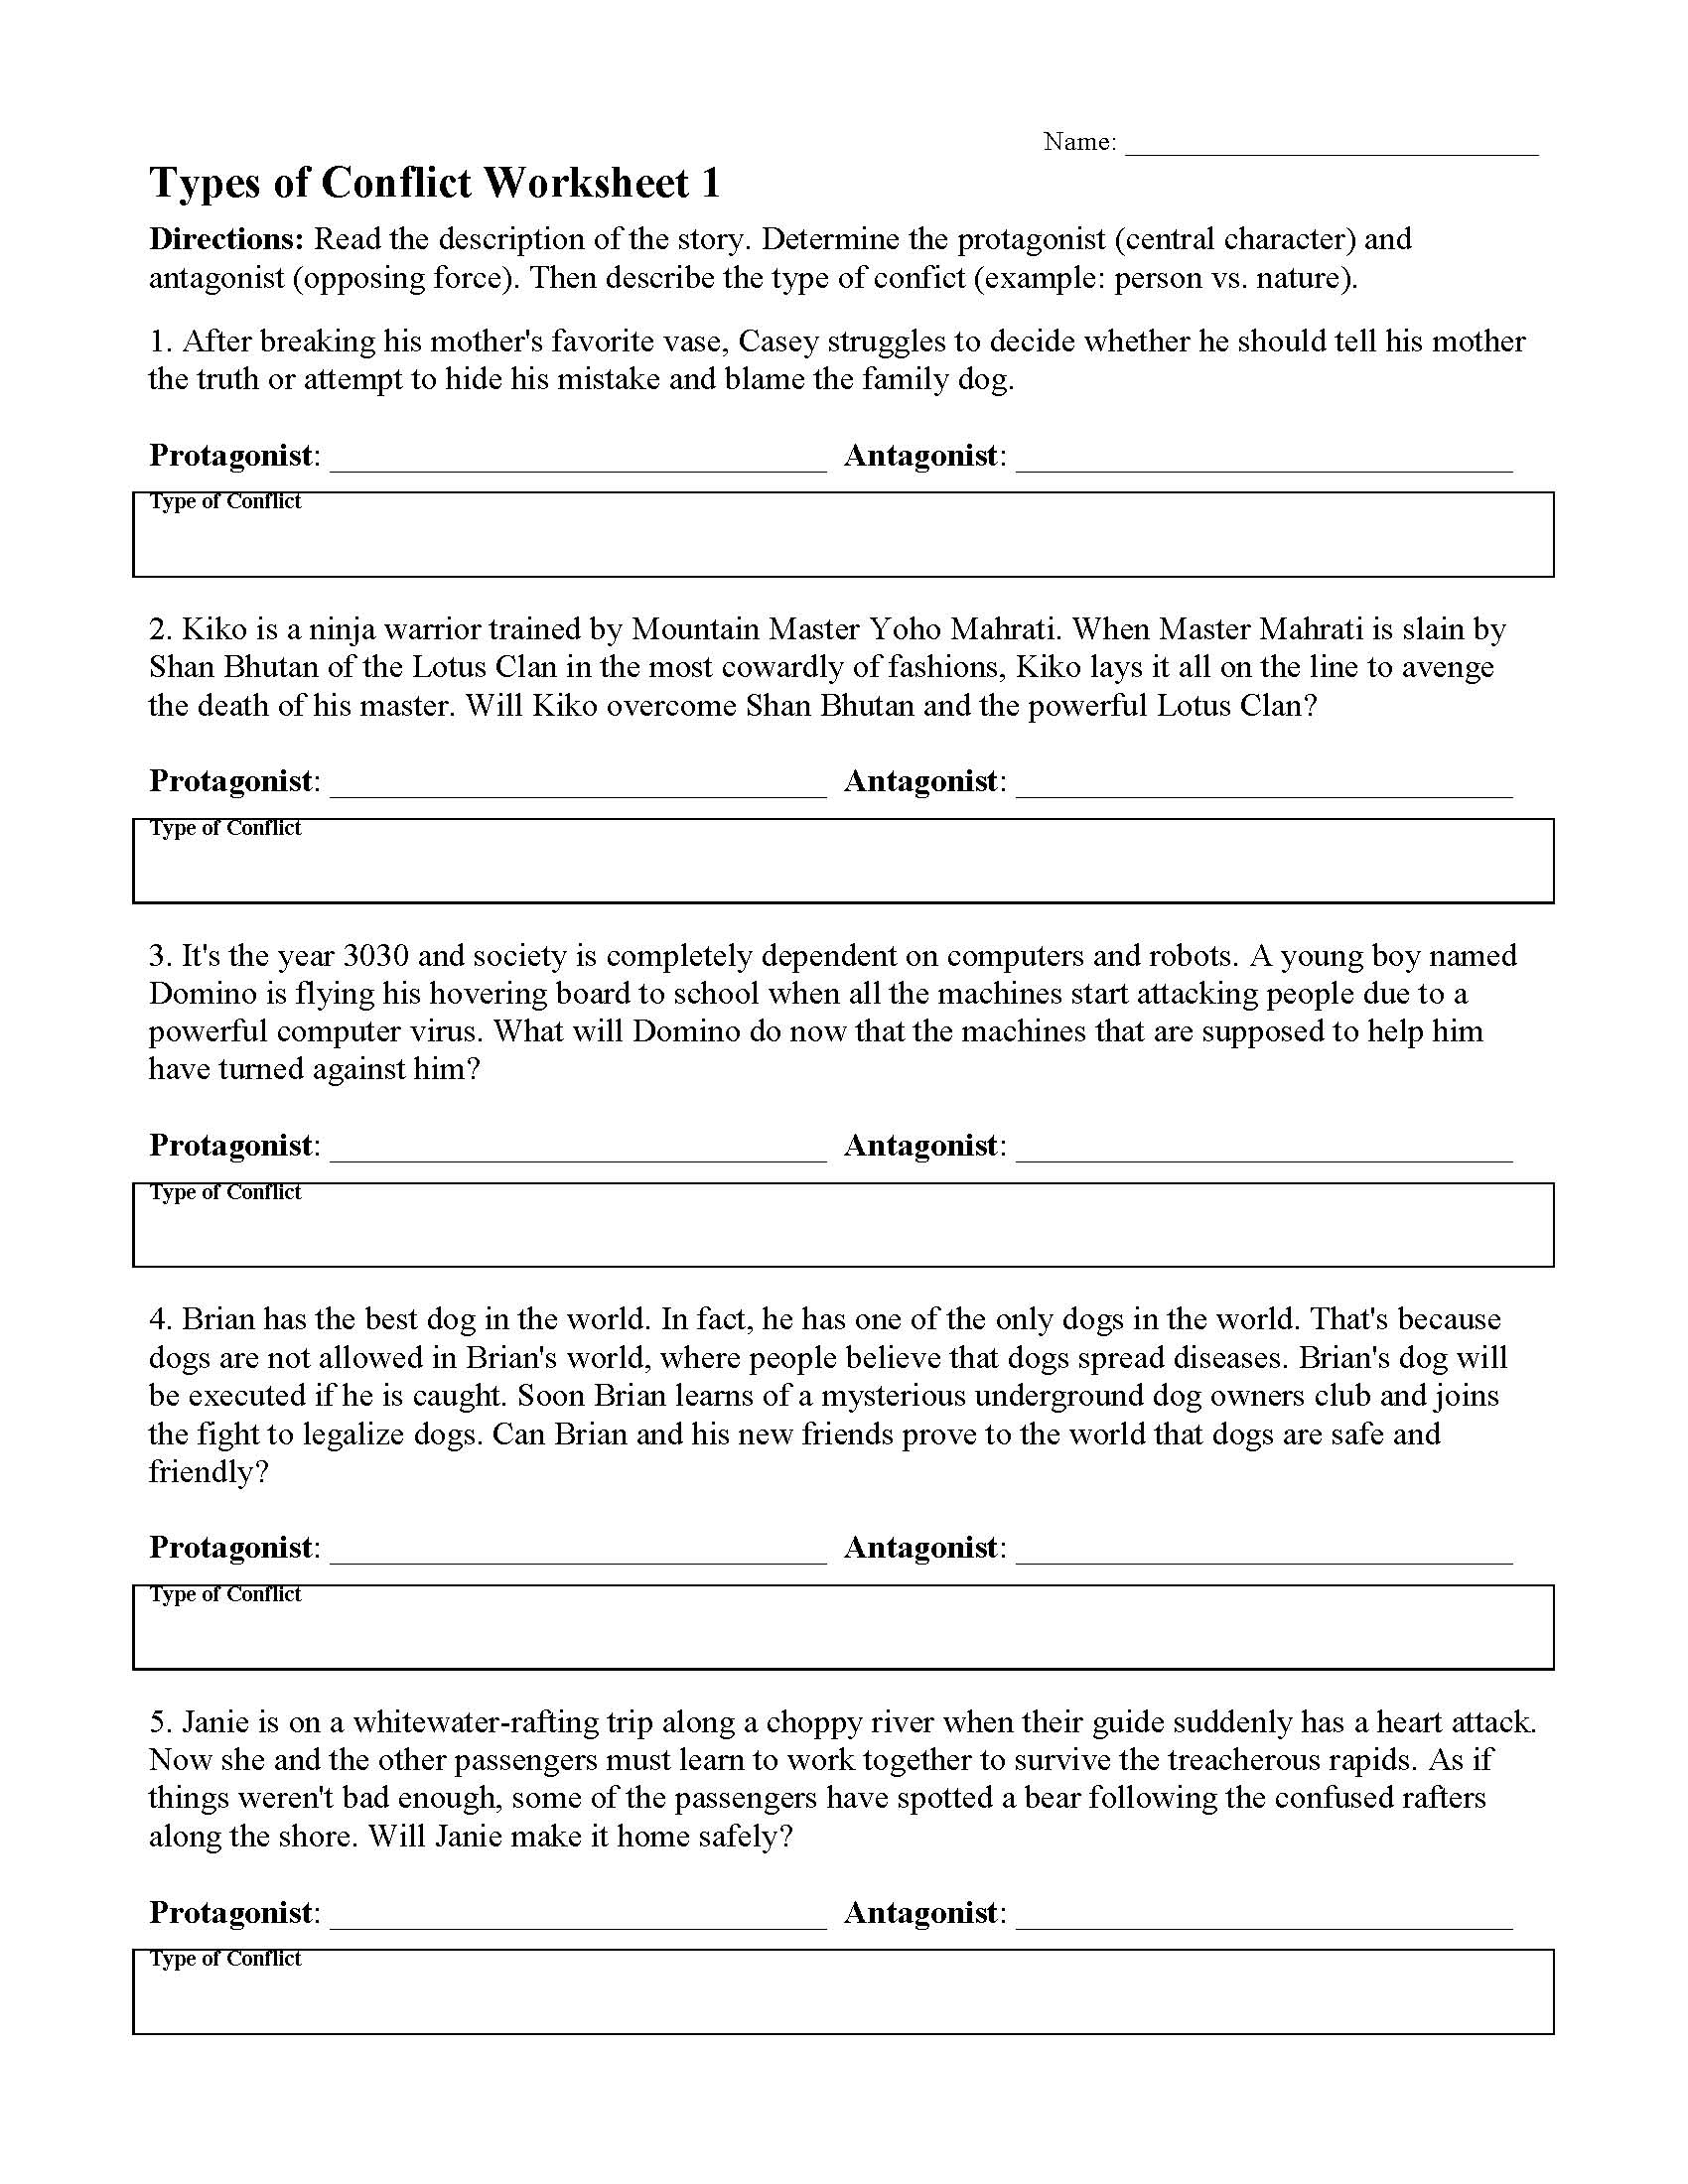 Types of Conflict Worksheet 21  Reading Activity Within Protagonist And Antagonist Worksheet